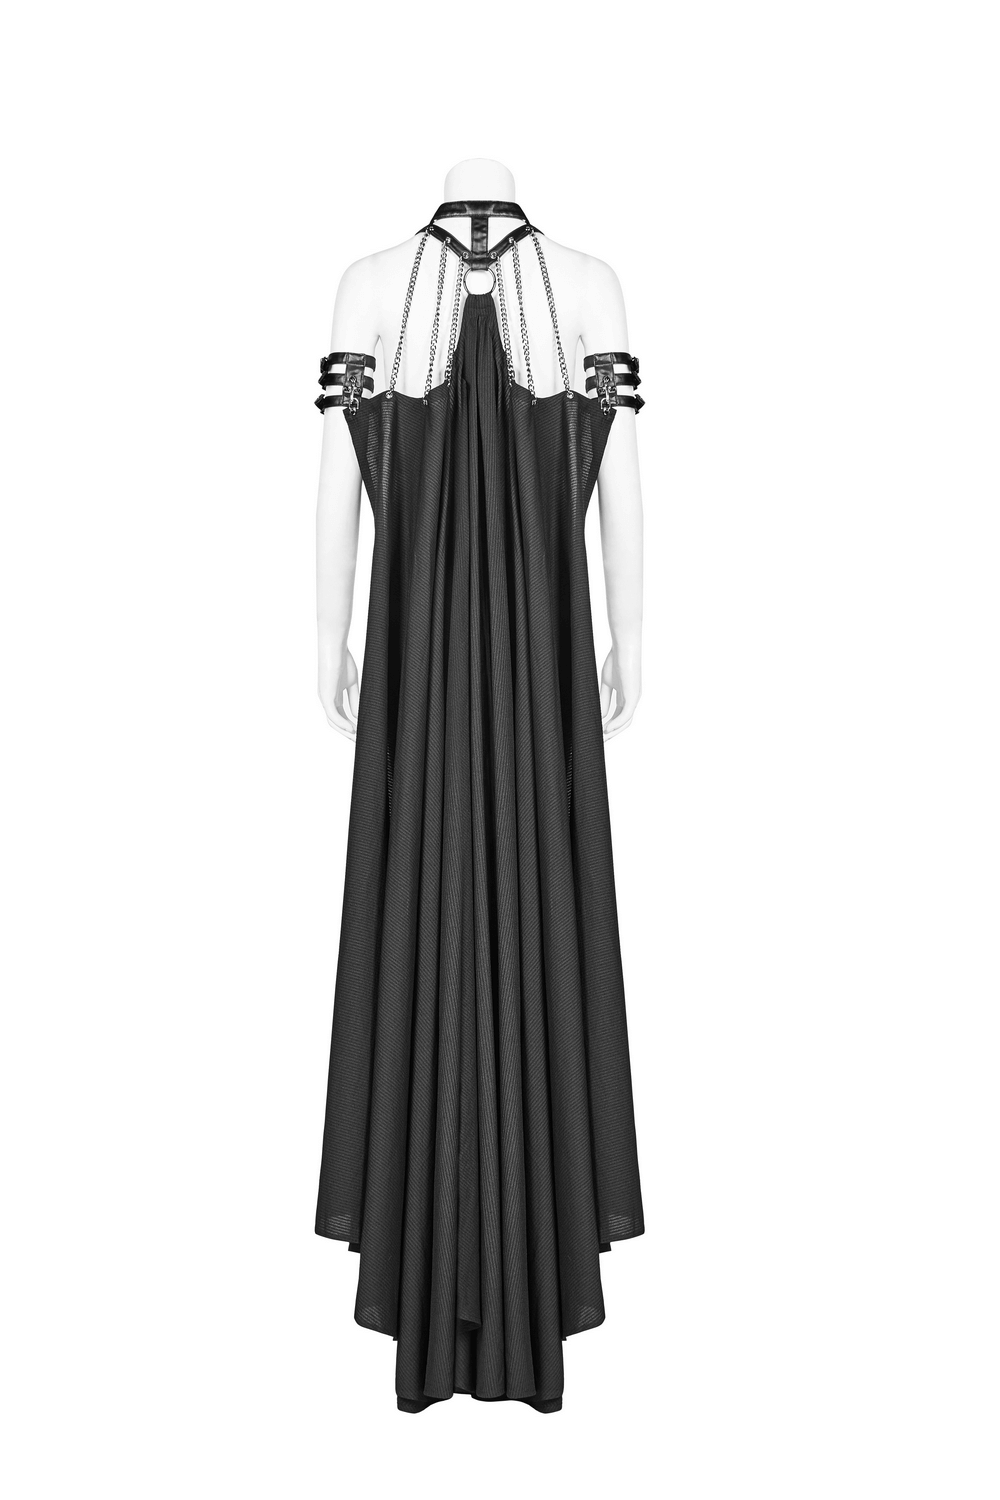 Gothic Punk Women's Chain-Linked Striped Cape